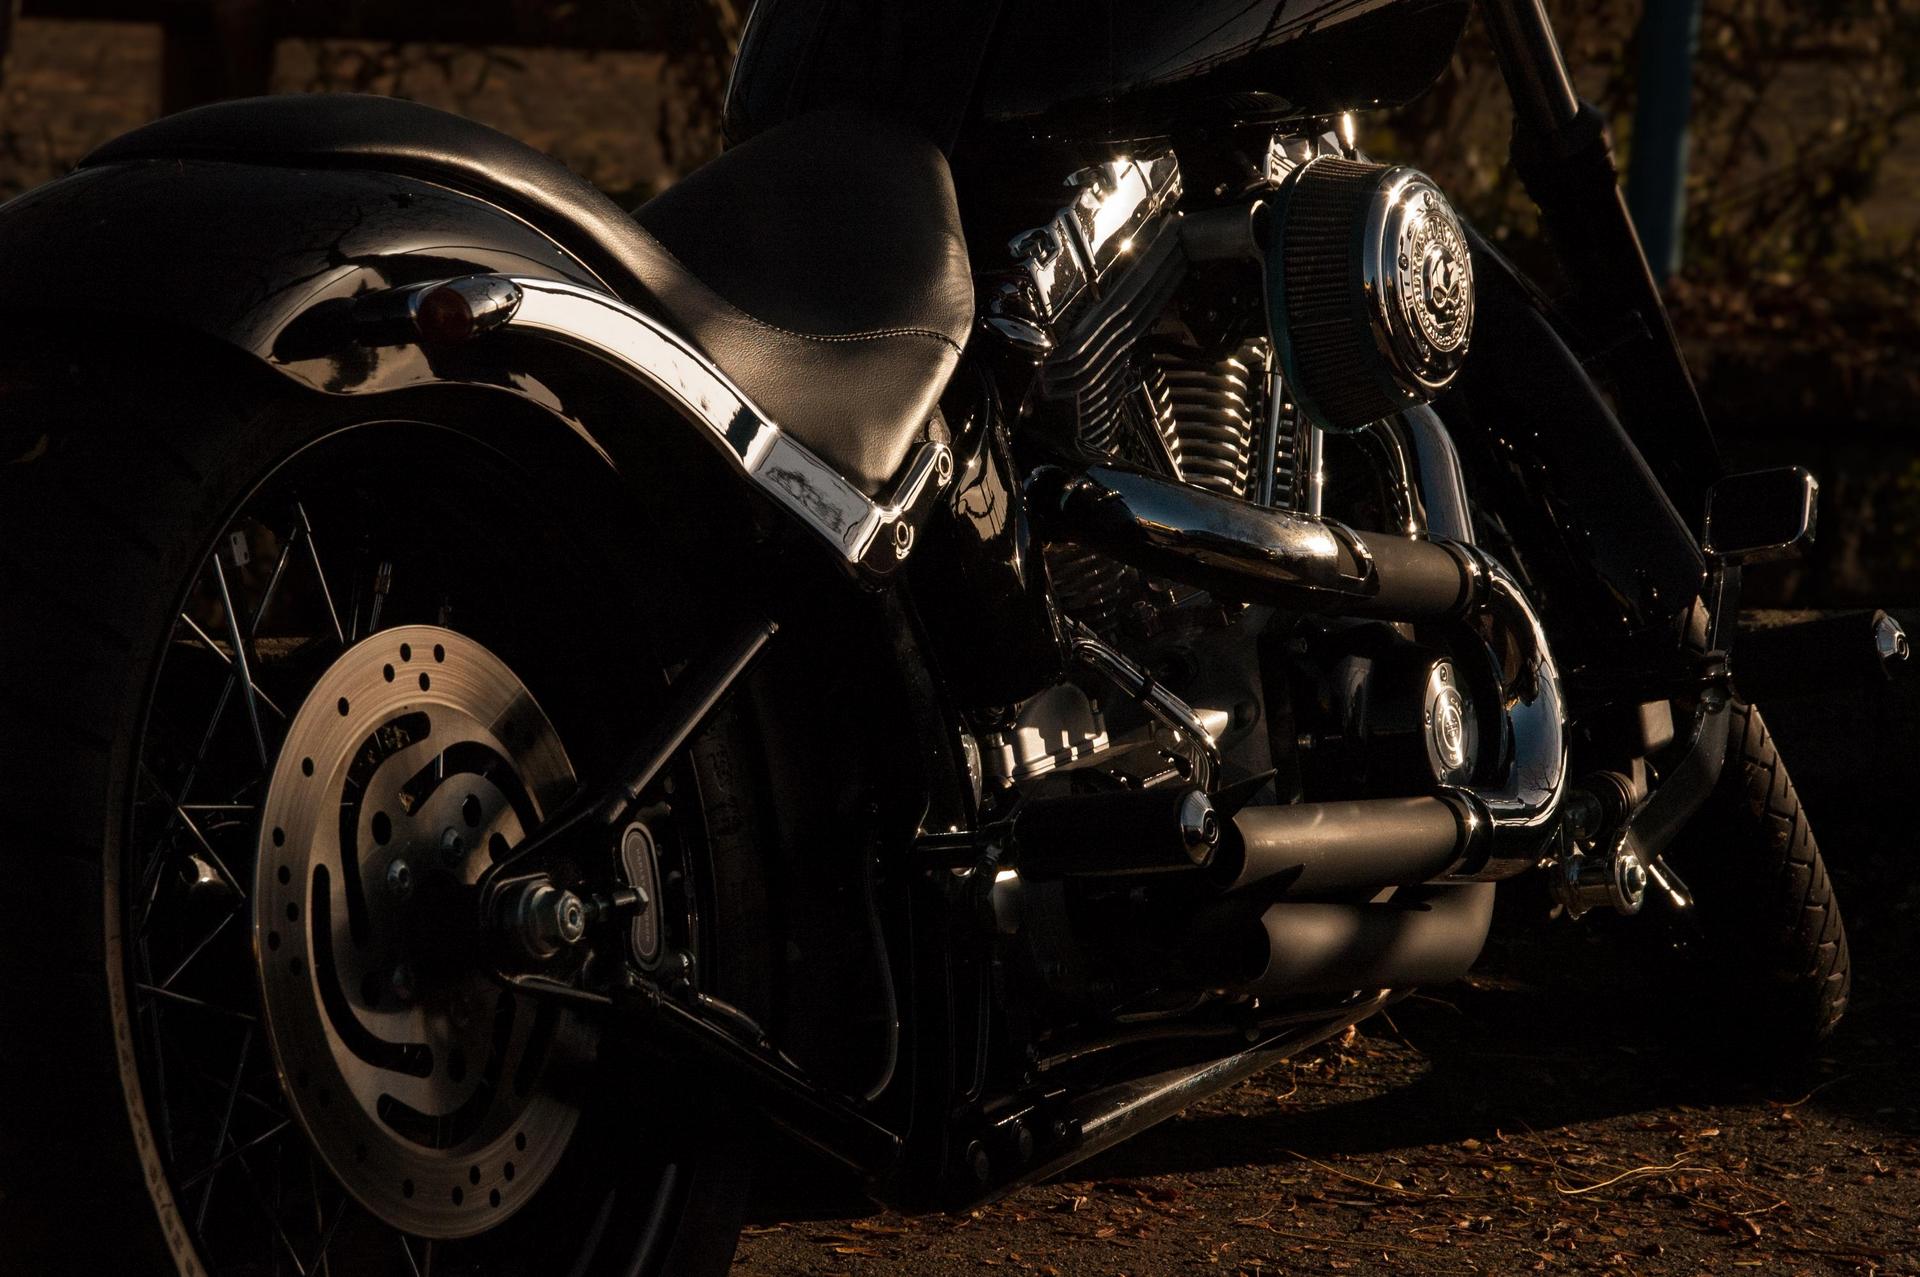 Seven men on four motorcycles threatened to beat and stab Aye Lwin and his family. Photo: Pexels